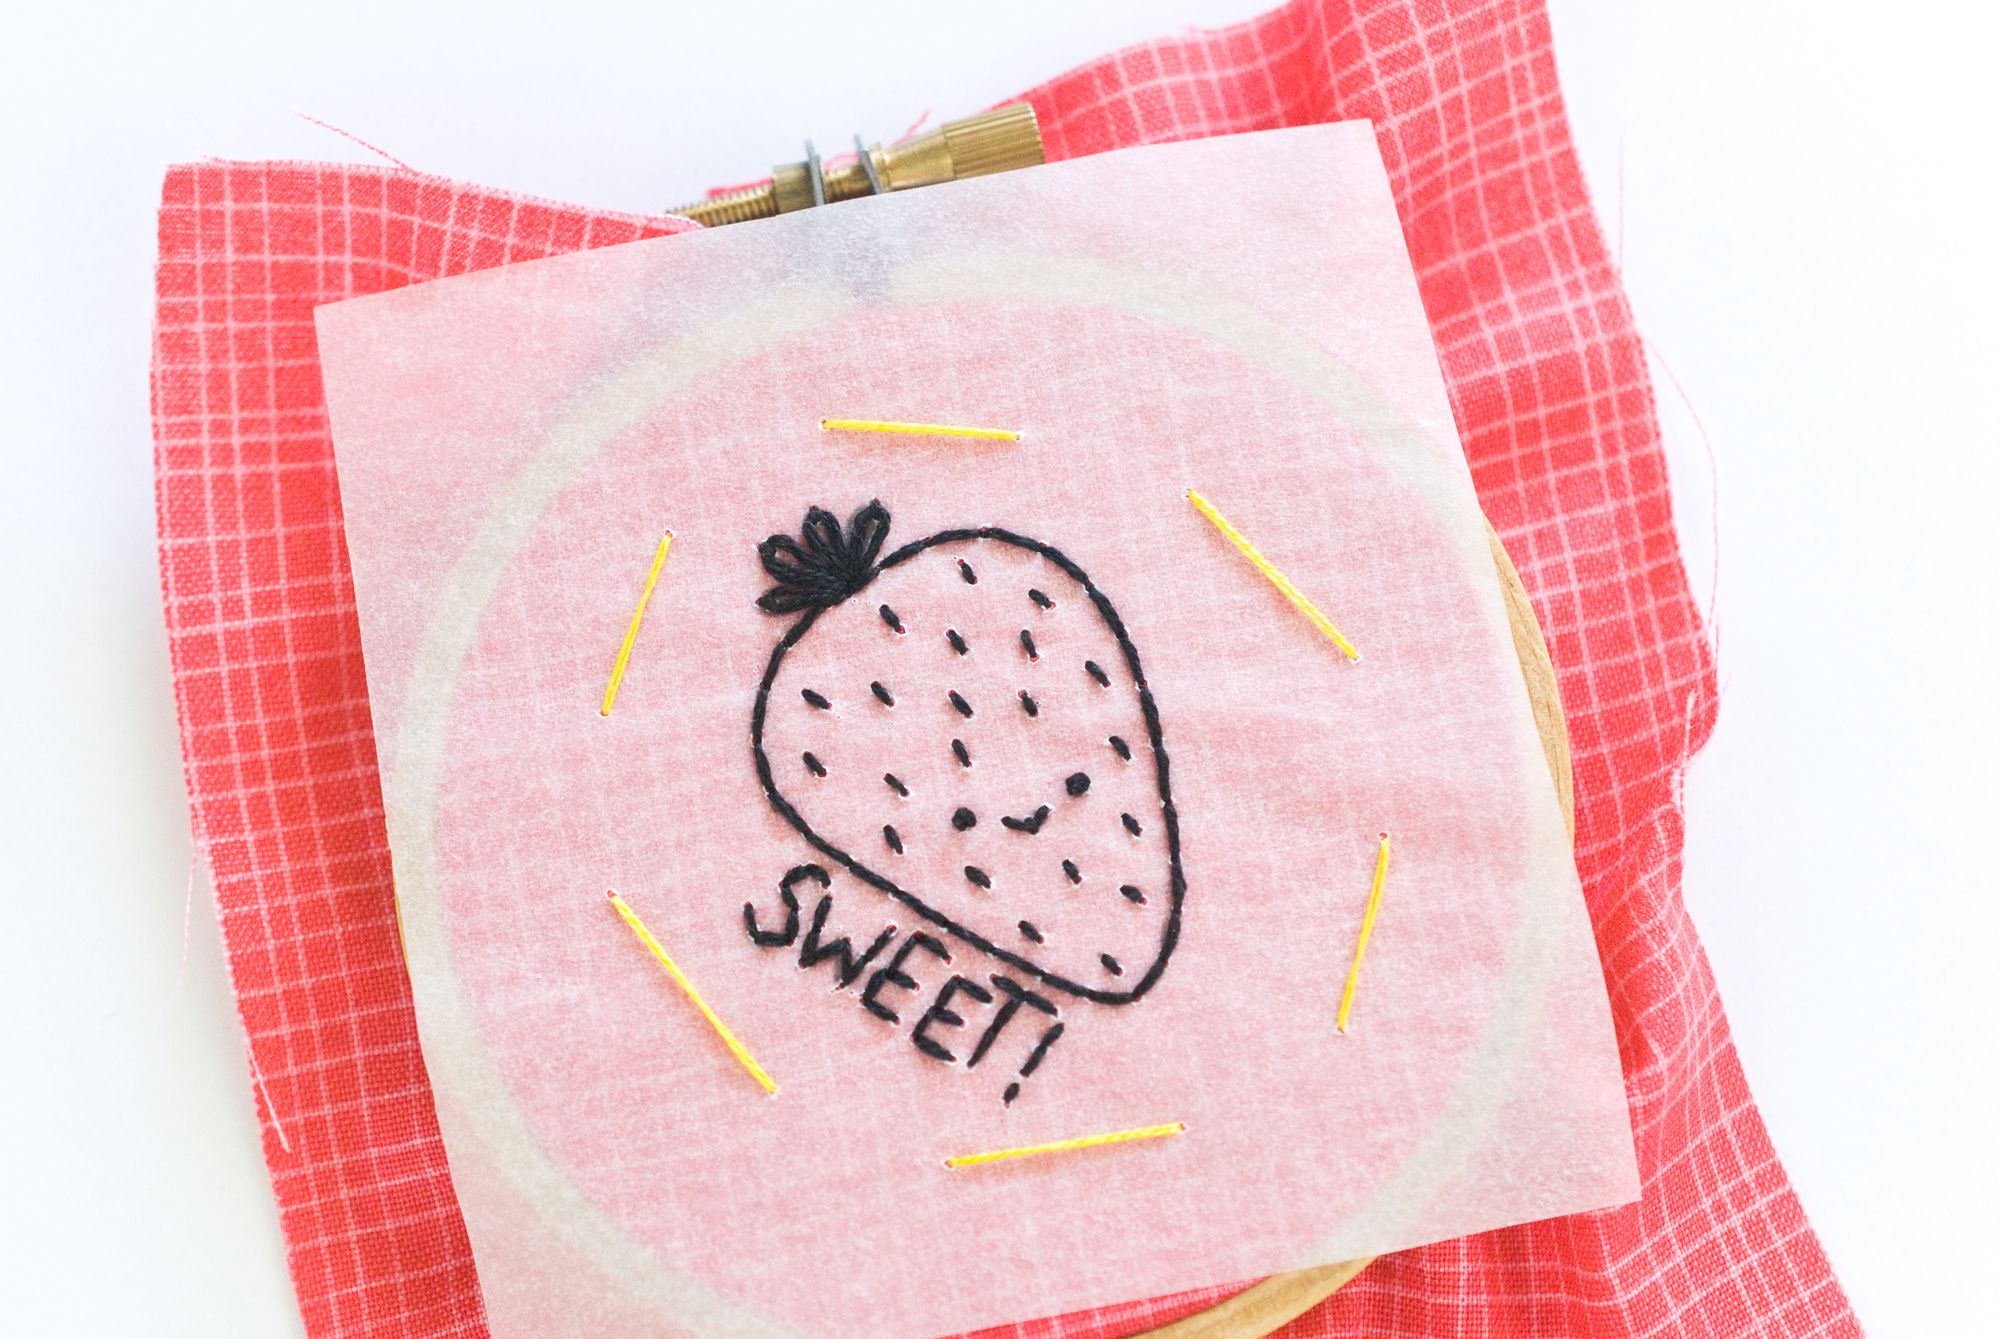 Transfer Embroidery Pattern To Fabric Using The Tracing Paper Embroidery Transfer Method